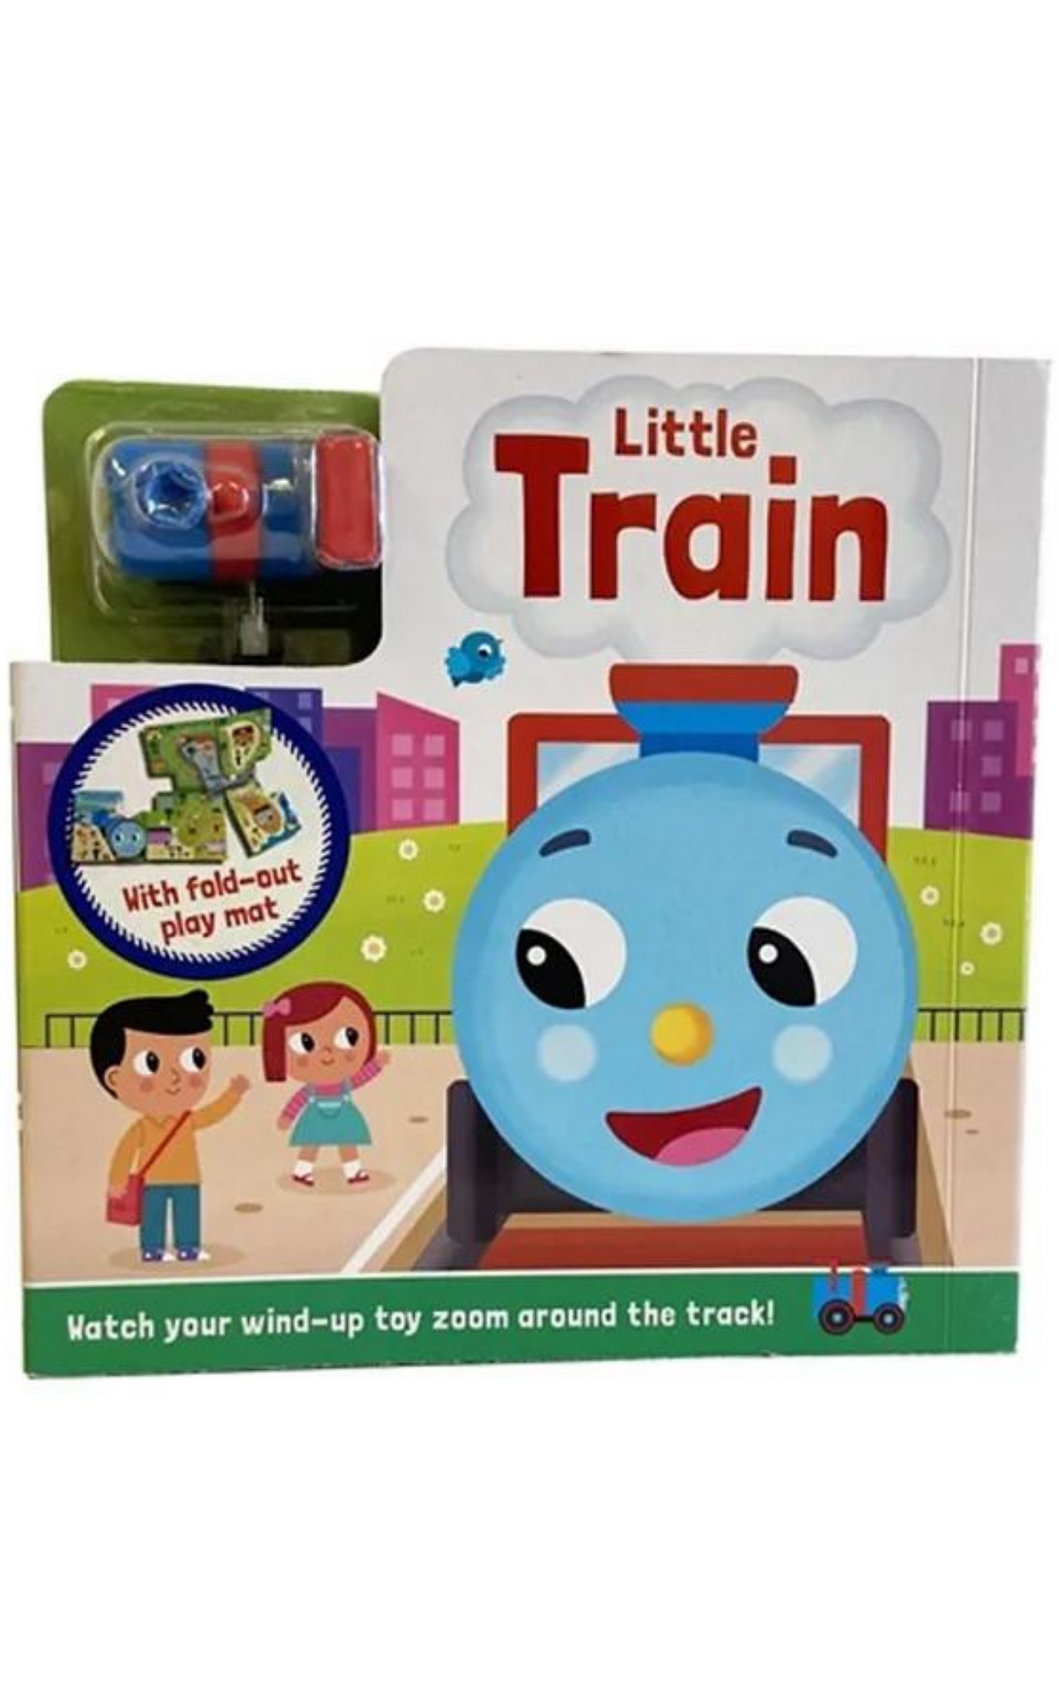 Little Train: Read & Play with Fold-Out Play Mat and Wind-Up Toy